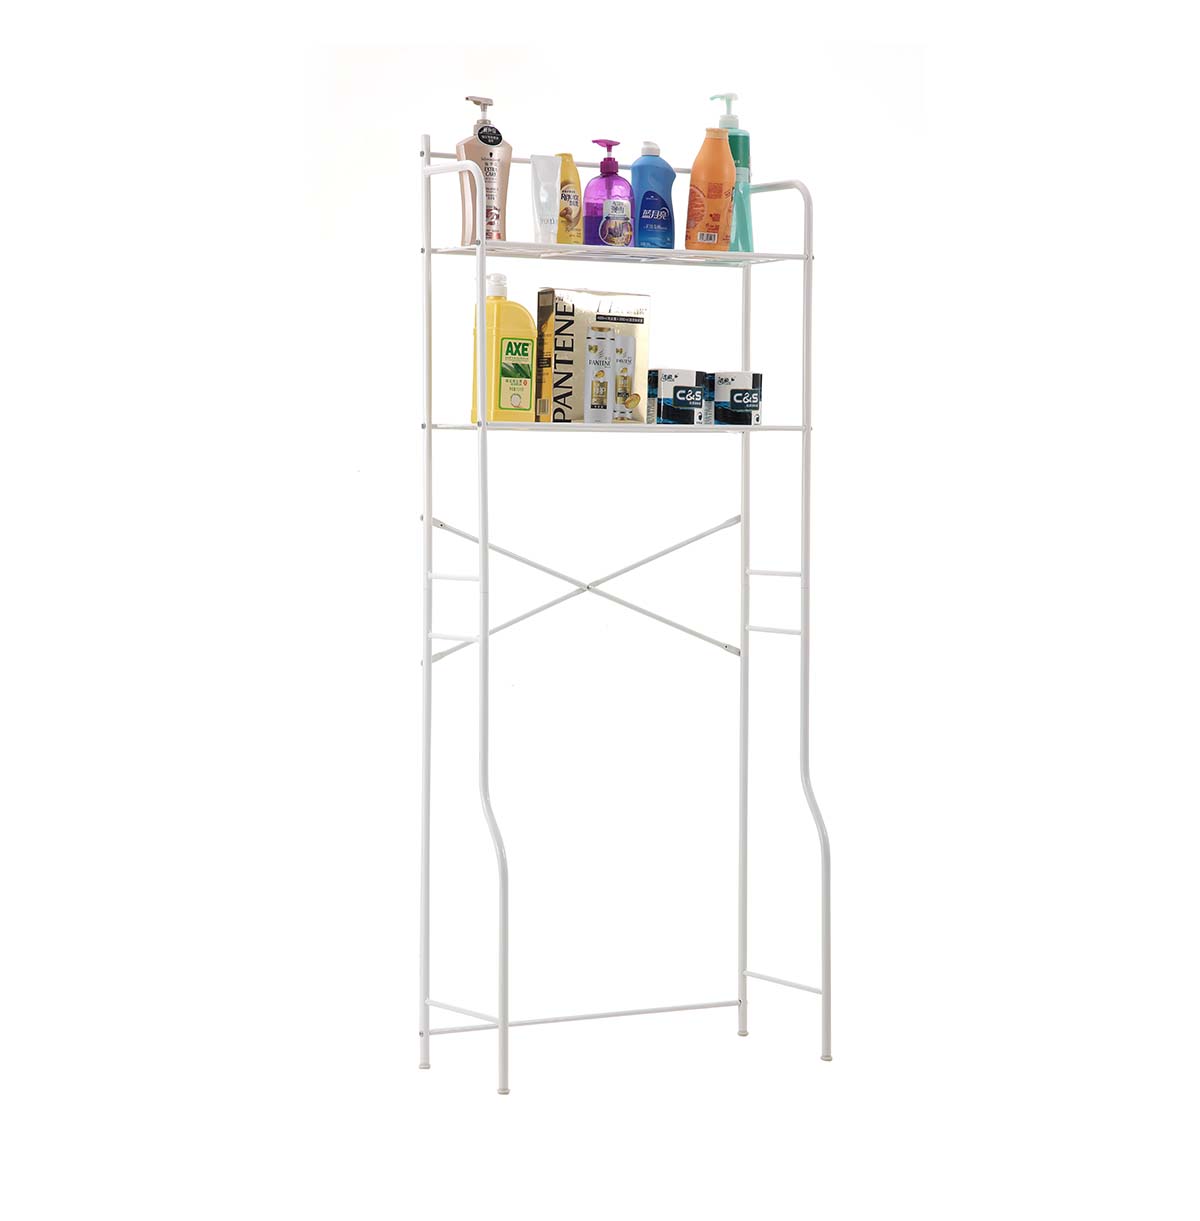 2-Tier Wire Shelving Units / Over The Toilet Storage Shelf / Bathroom Space Saving Organizer Rack Adjustable Stand 